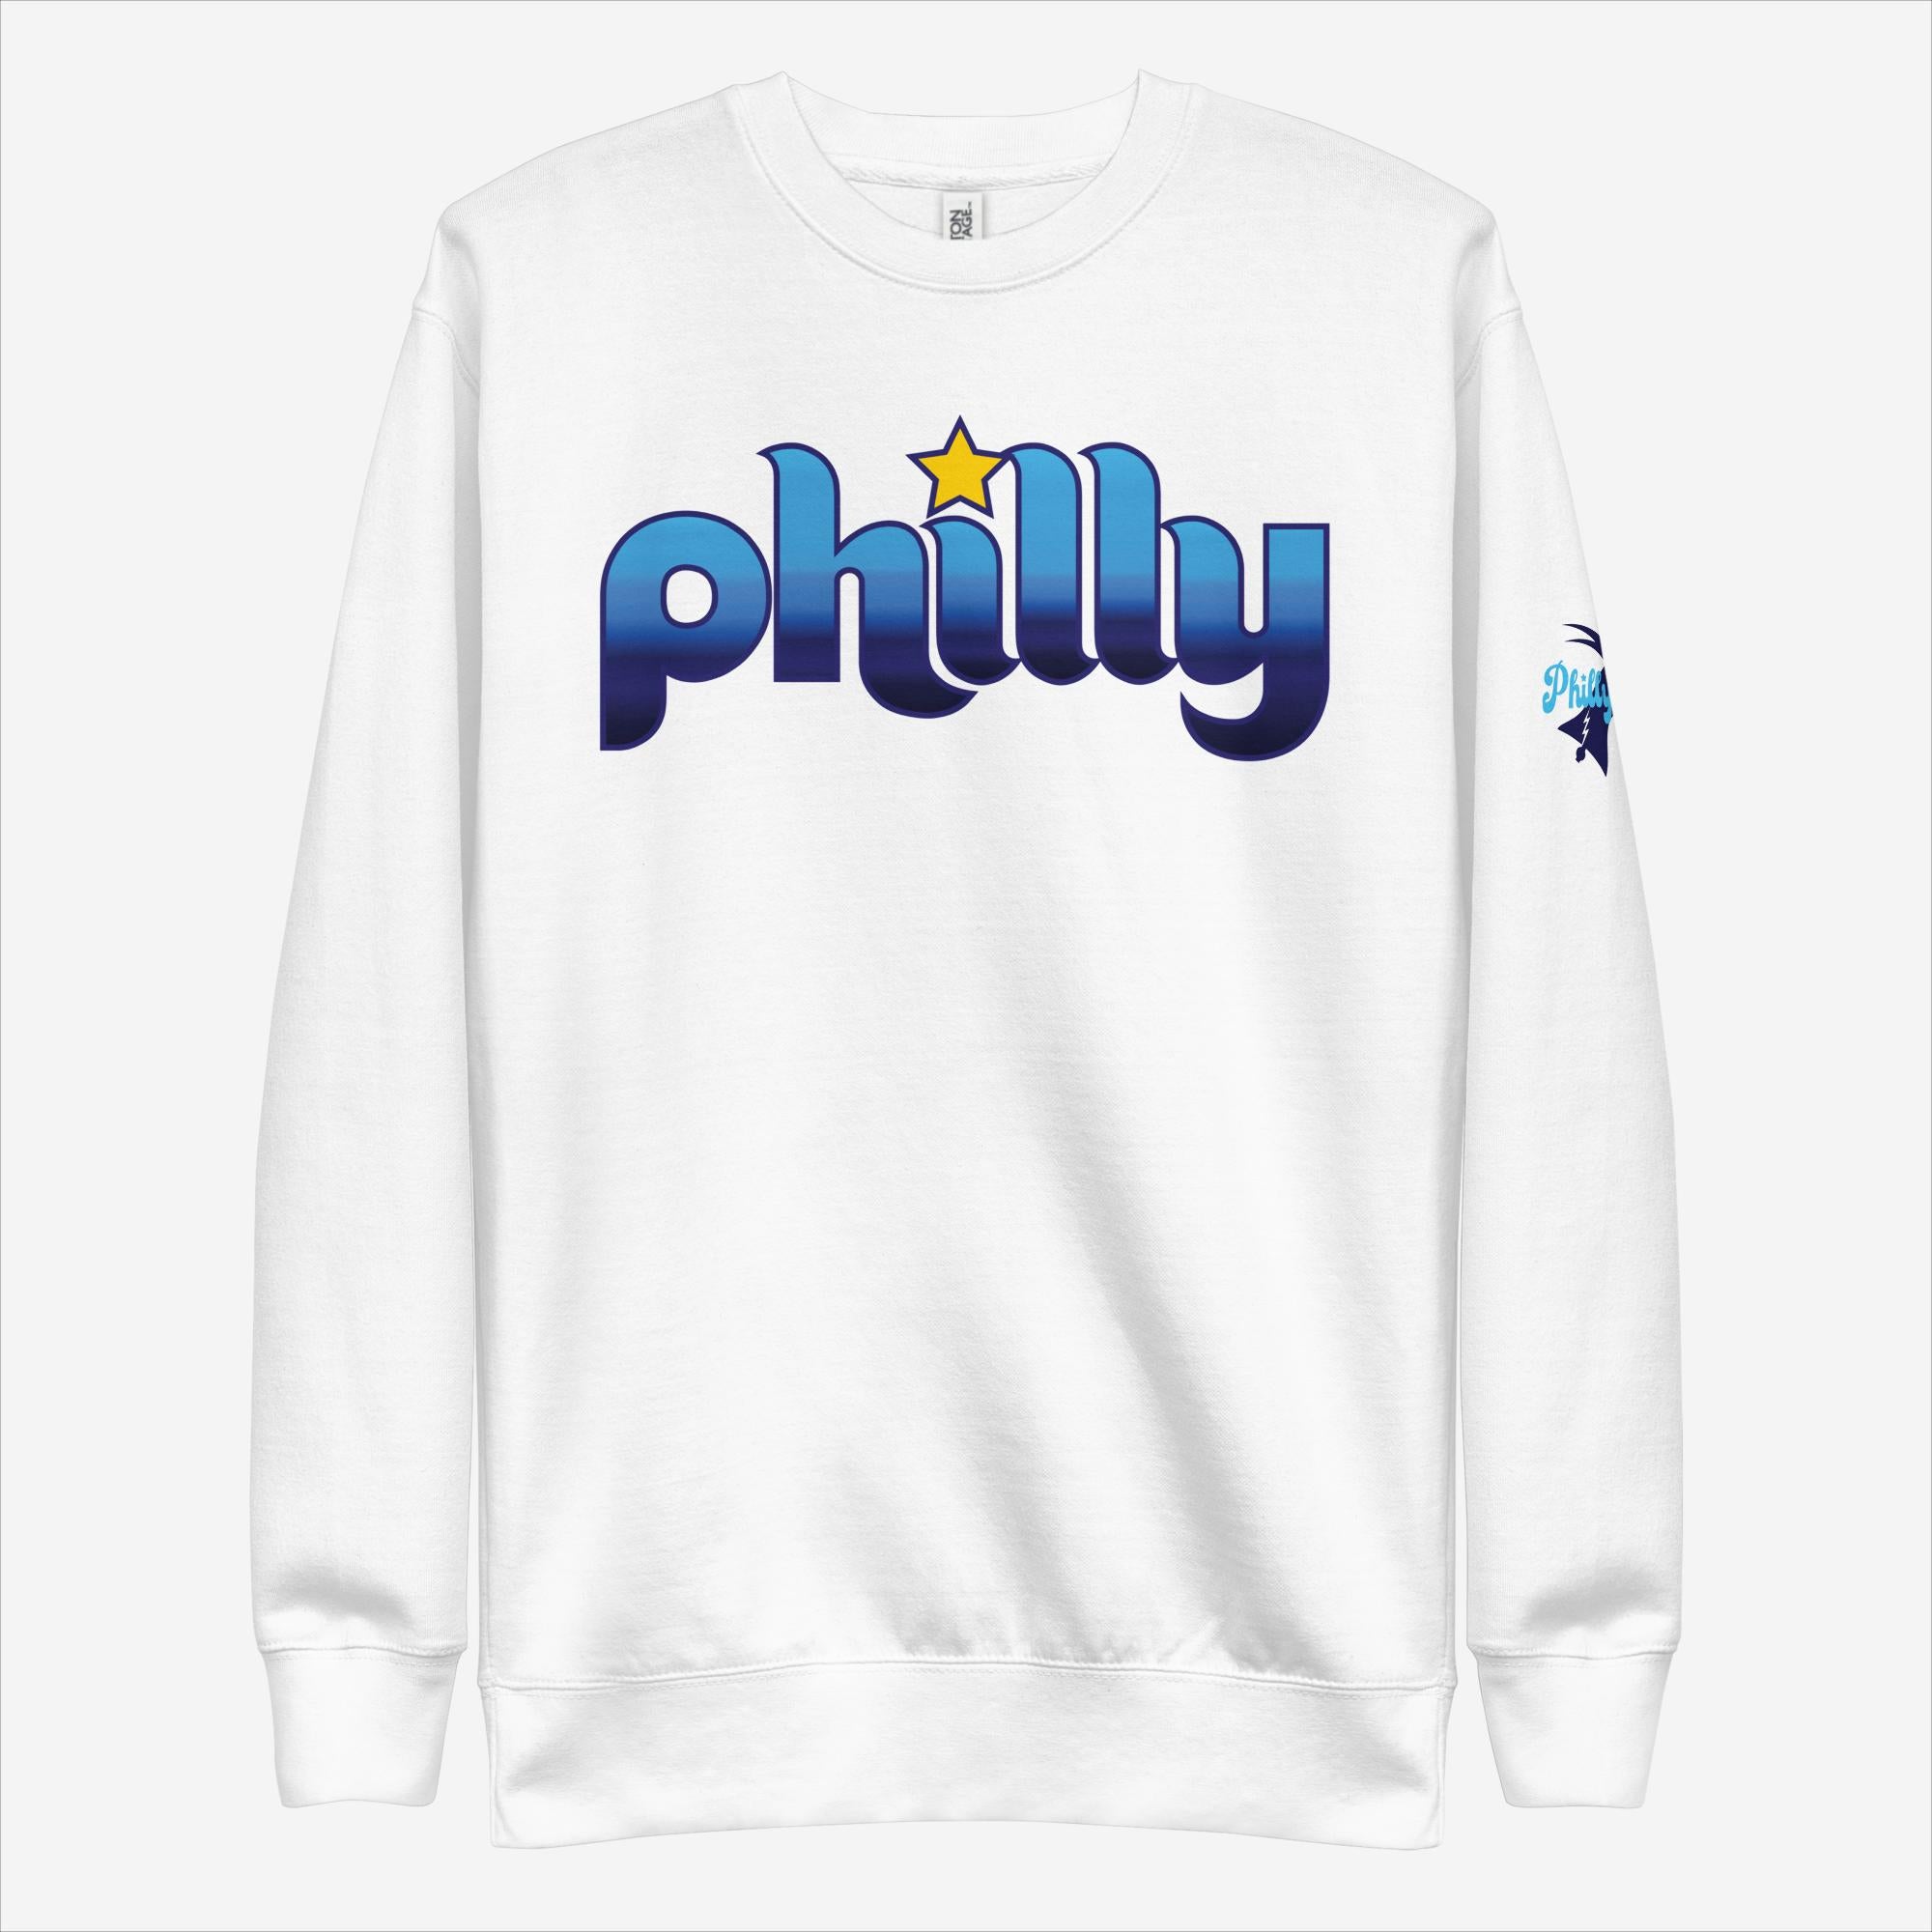 "Philly Connect" Sweatshirt